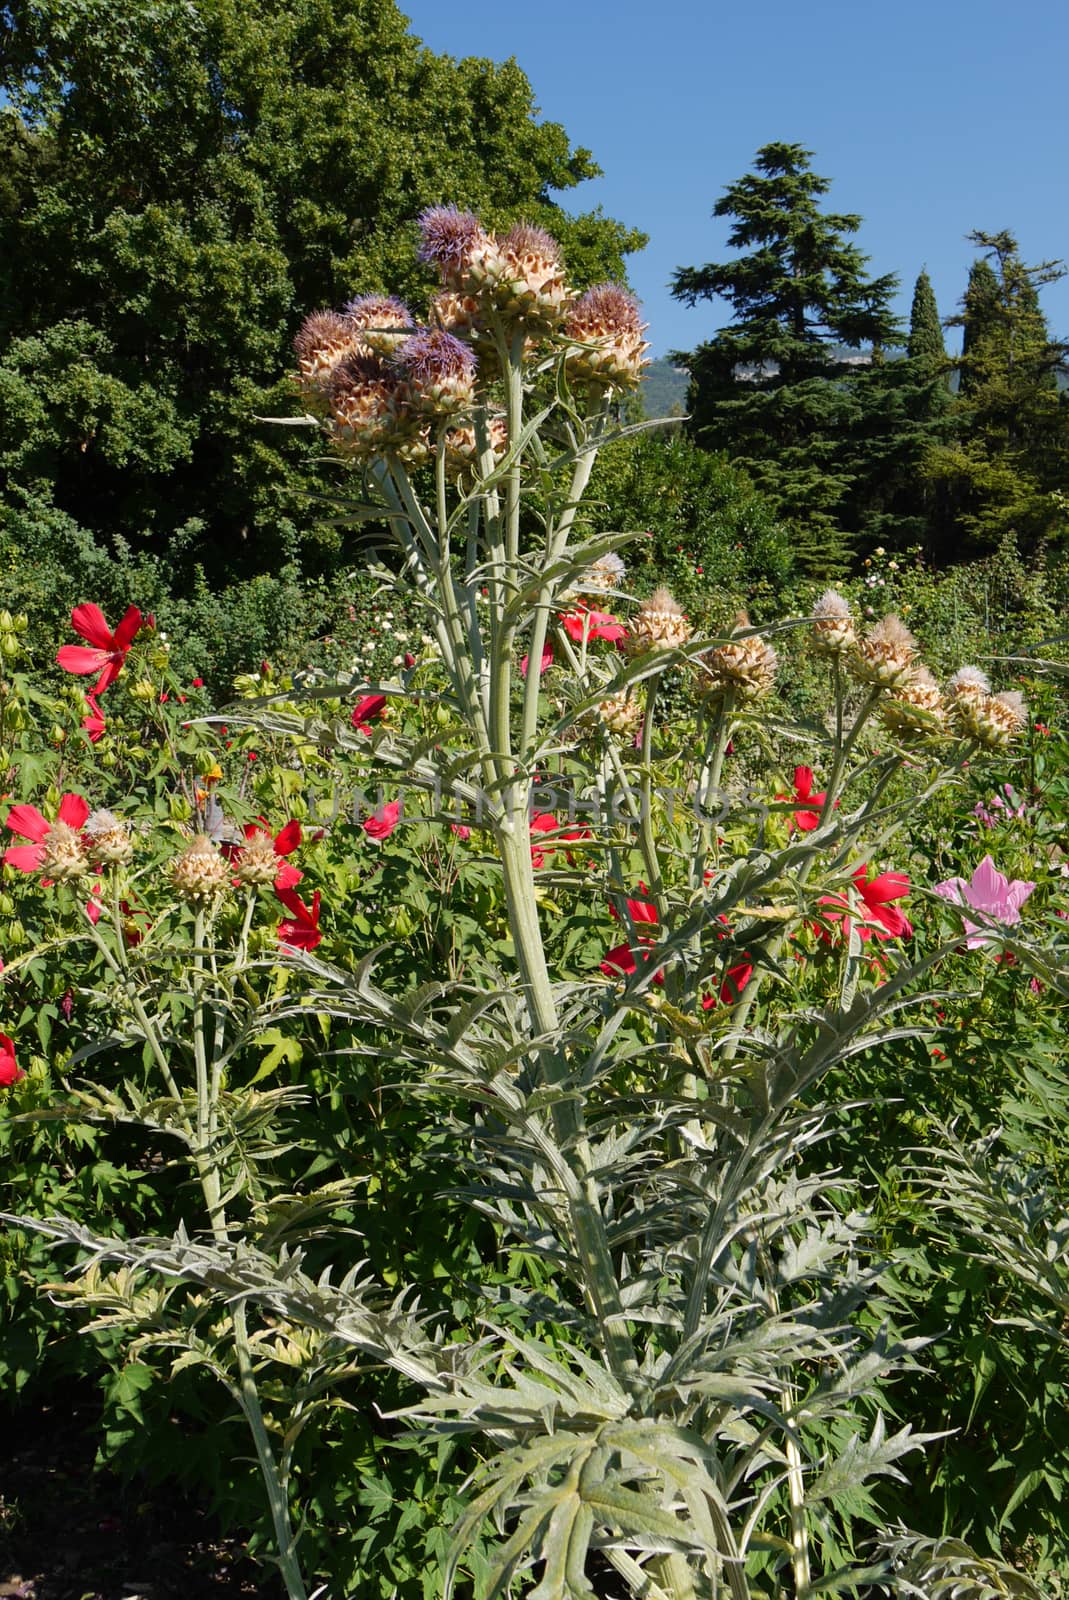 Several Artichoke protea shrubs are surrounded by other flowers  by Adamchuk